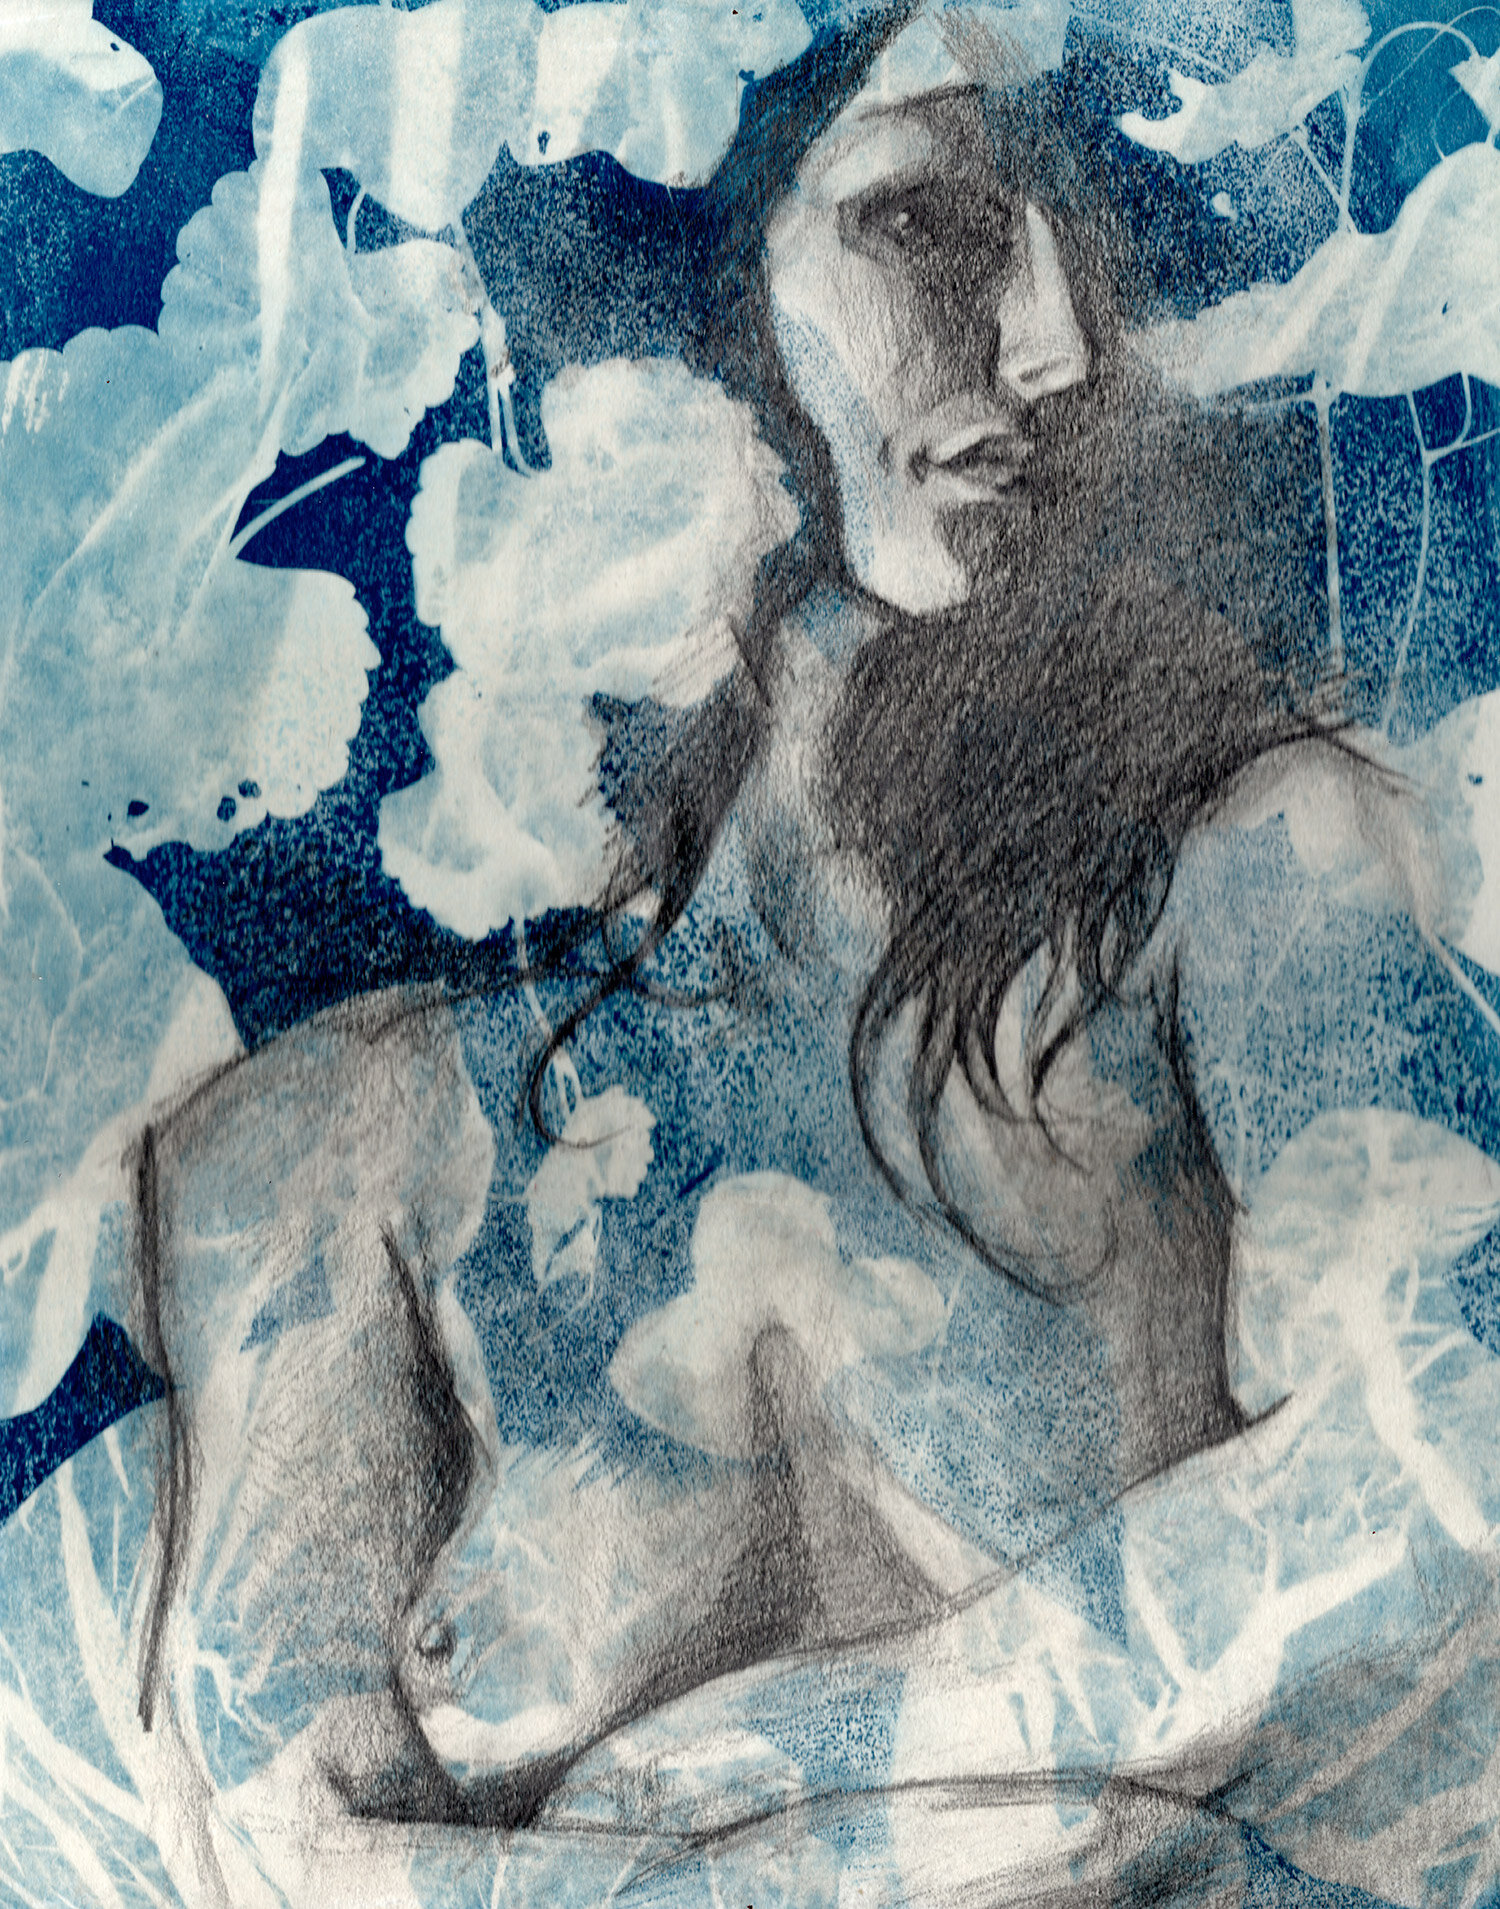   See The Bright And Hollow Sky,  Cyanotype and graphite on panel, 14x11, 2020, SOLD 